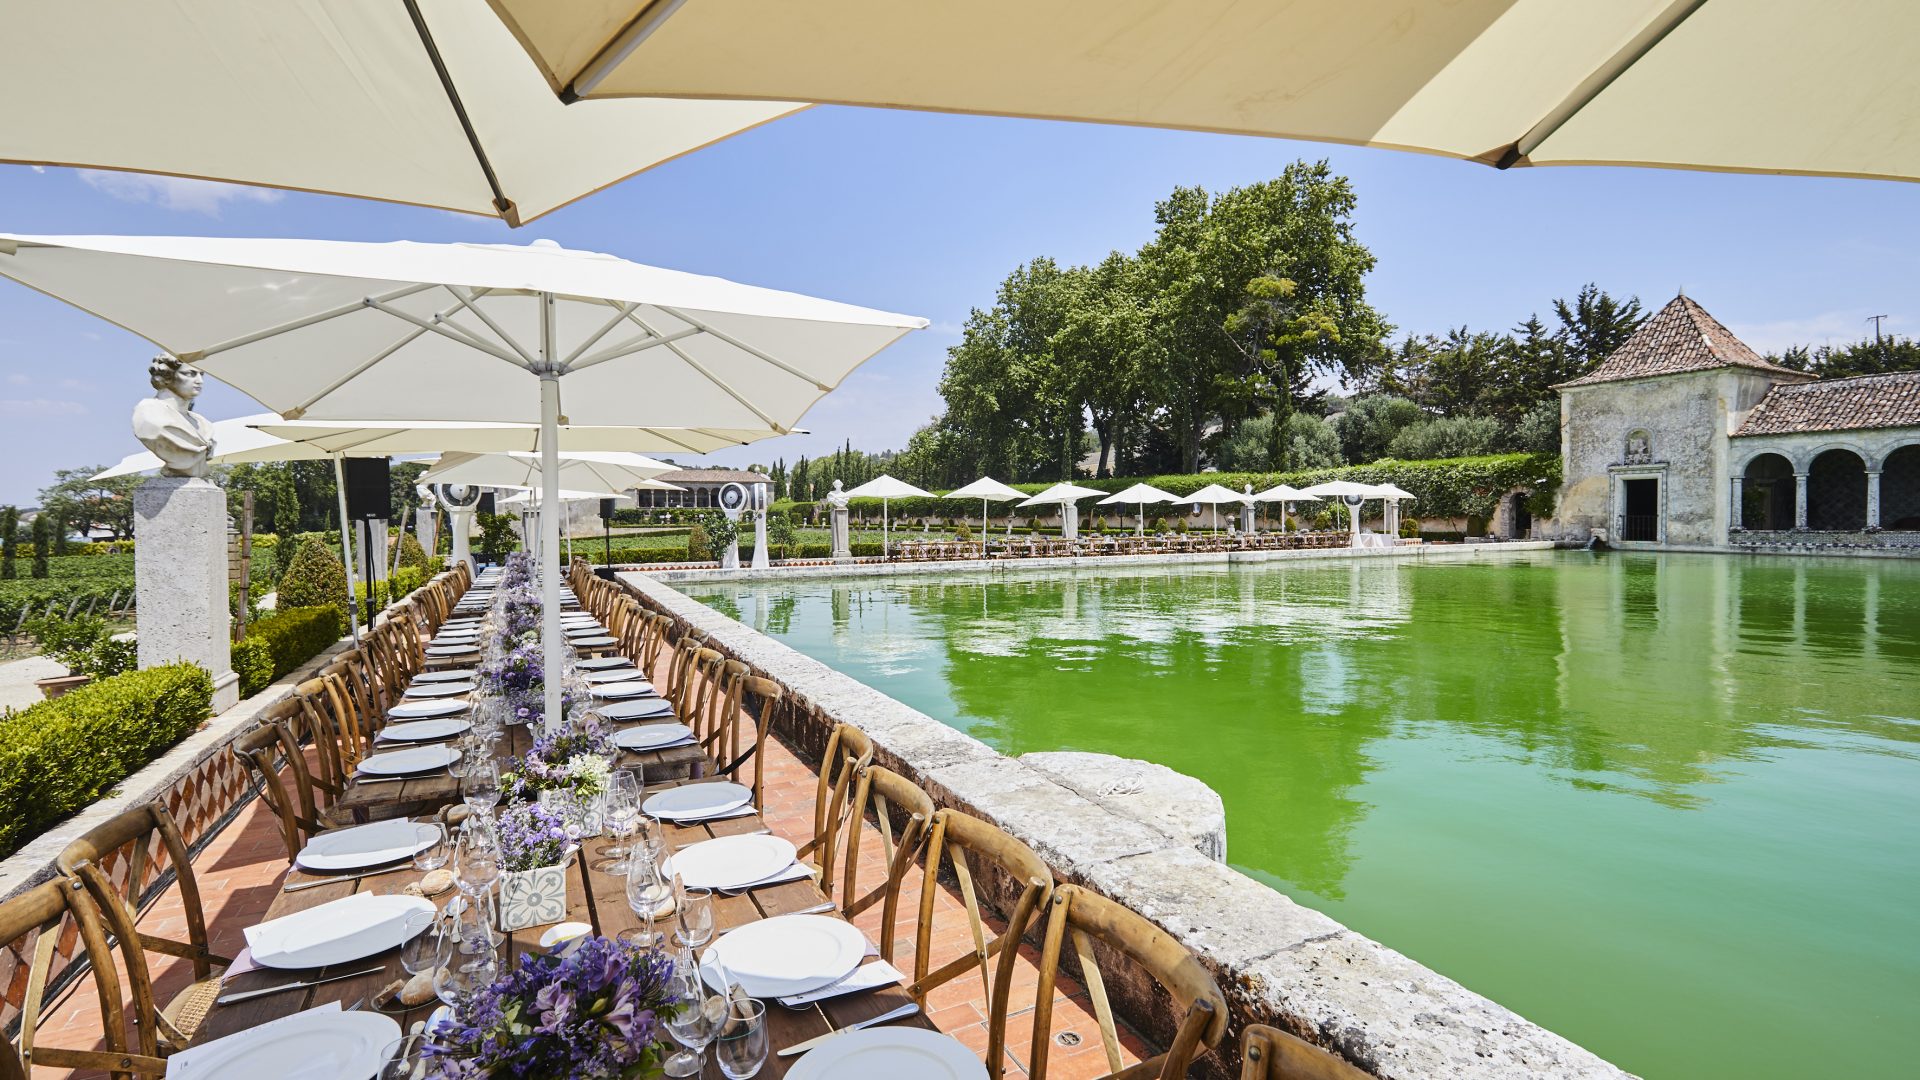 Corporate lunch setup - outdoor winery event venue in Lisbon